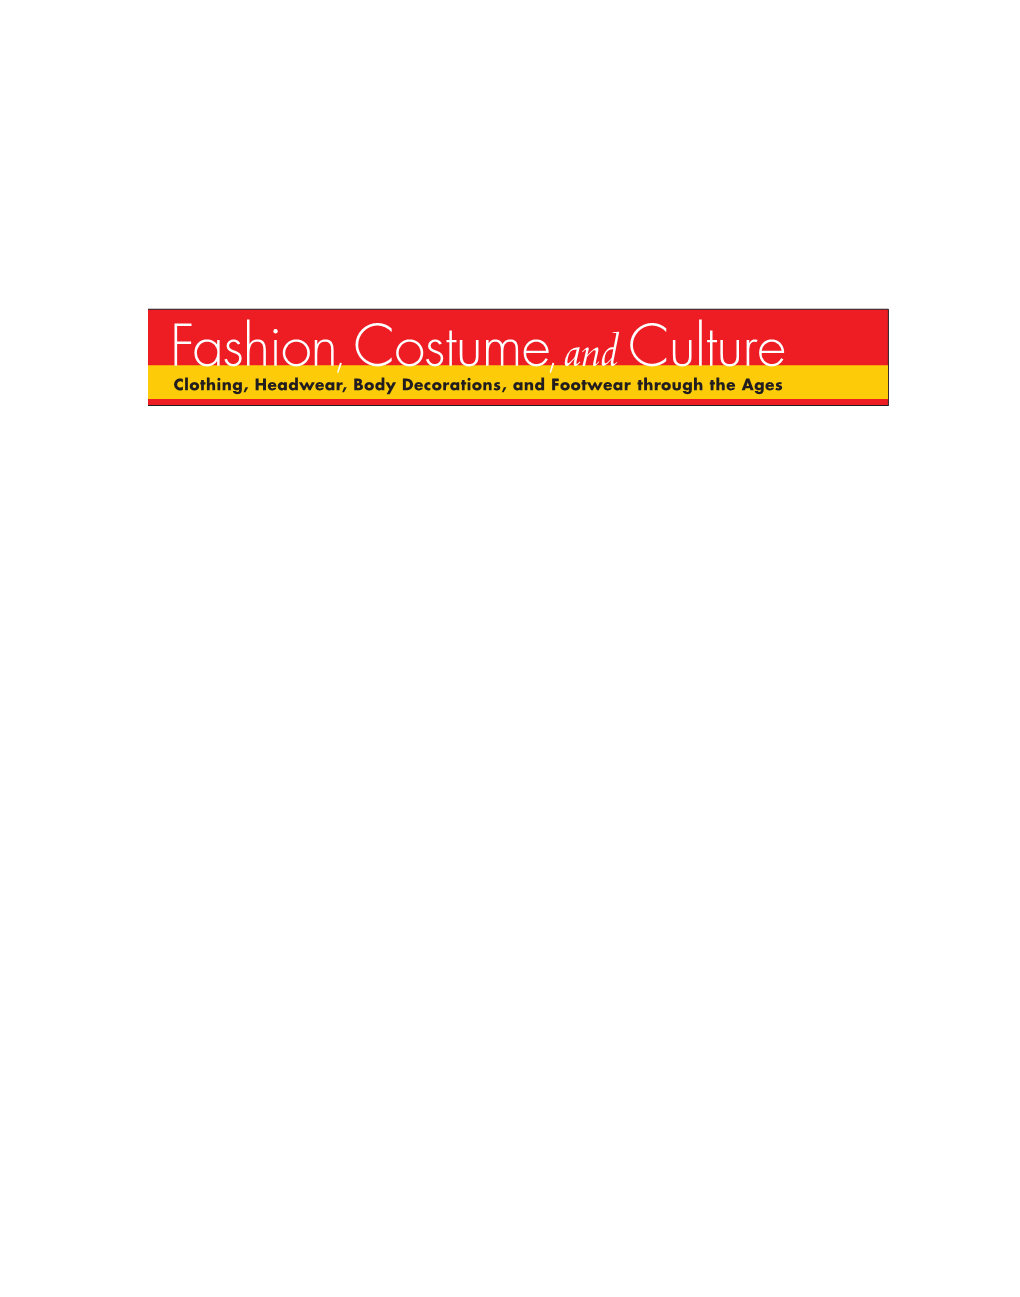 Fashion, Costume, and Culture Clothing, Headwear, Body Decorations, and Footwear Through the Ages FCC TP V2 930 3/5/04 3:55 PM Page 3